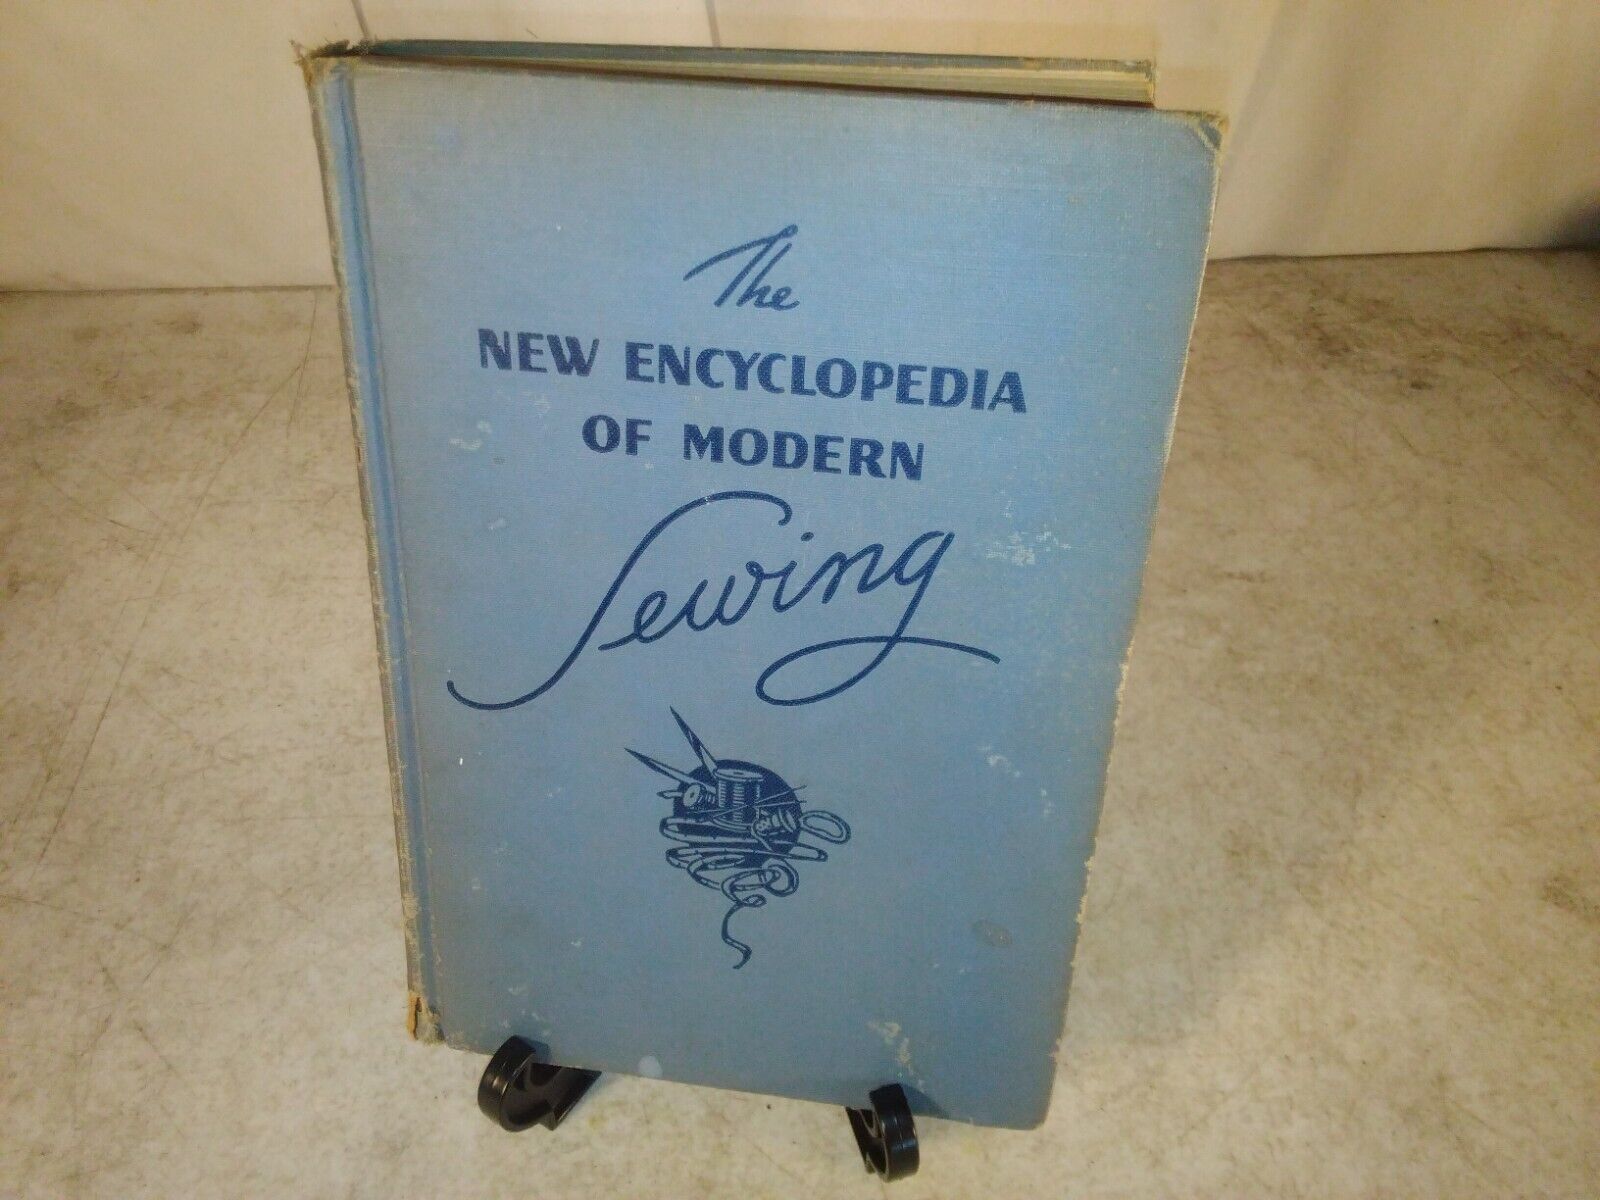 The New Encyclopedia of Modern Sewing, 1949 Copywrite, Published by Wise & Co.